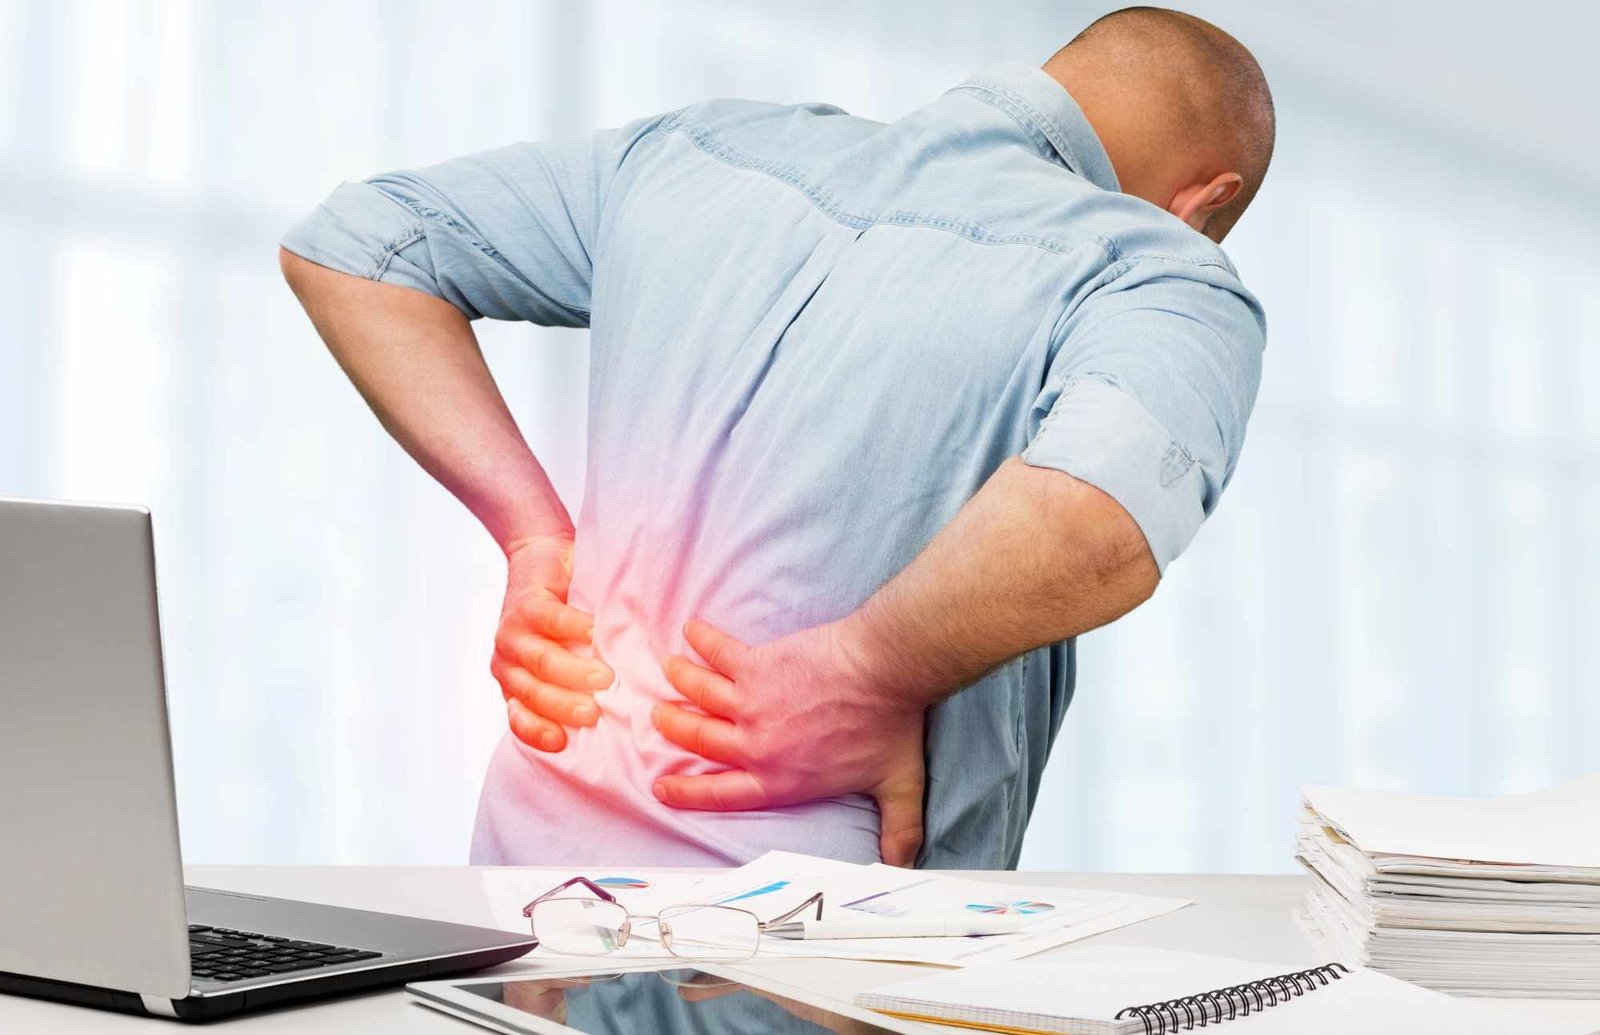 Man suffering from back pain in need of Pain Relief Injection